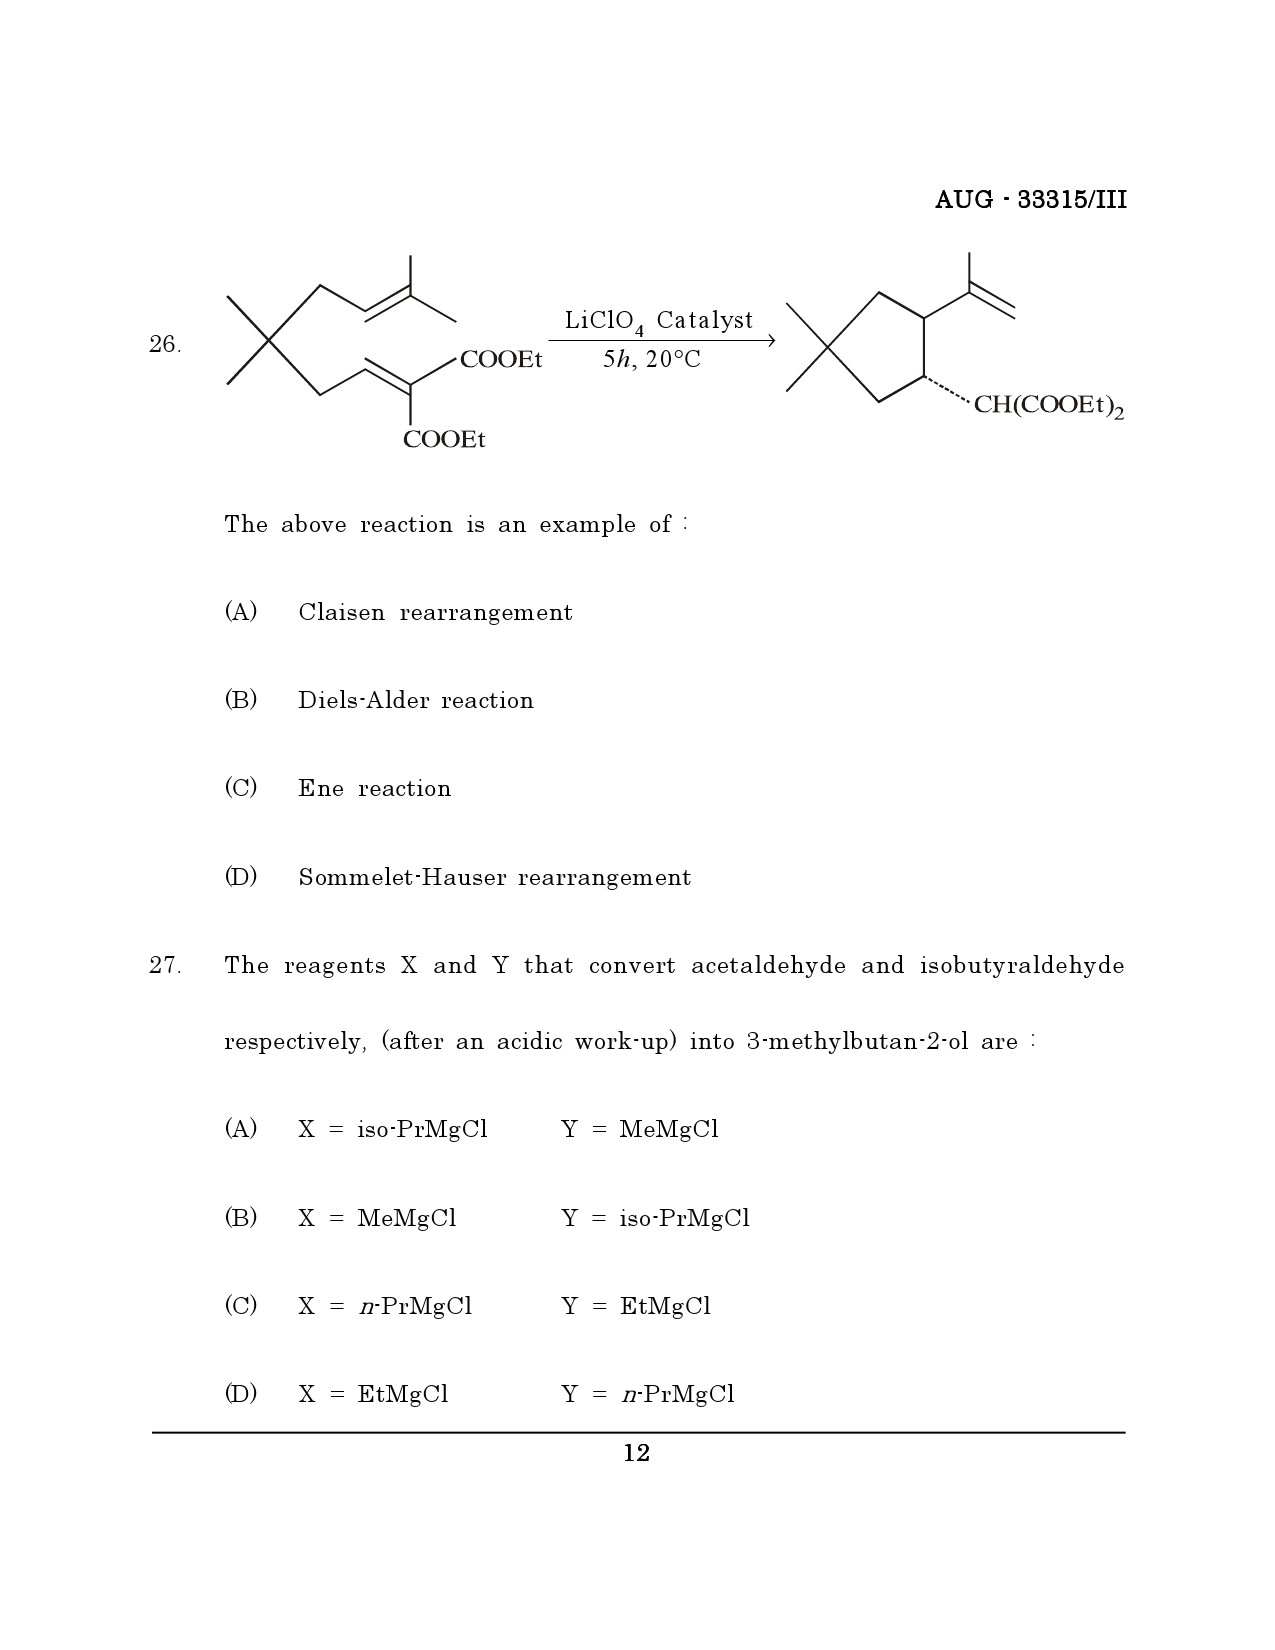 Maharashtra SET Chemical Sciences Question Paper III August 2015 11